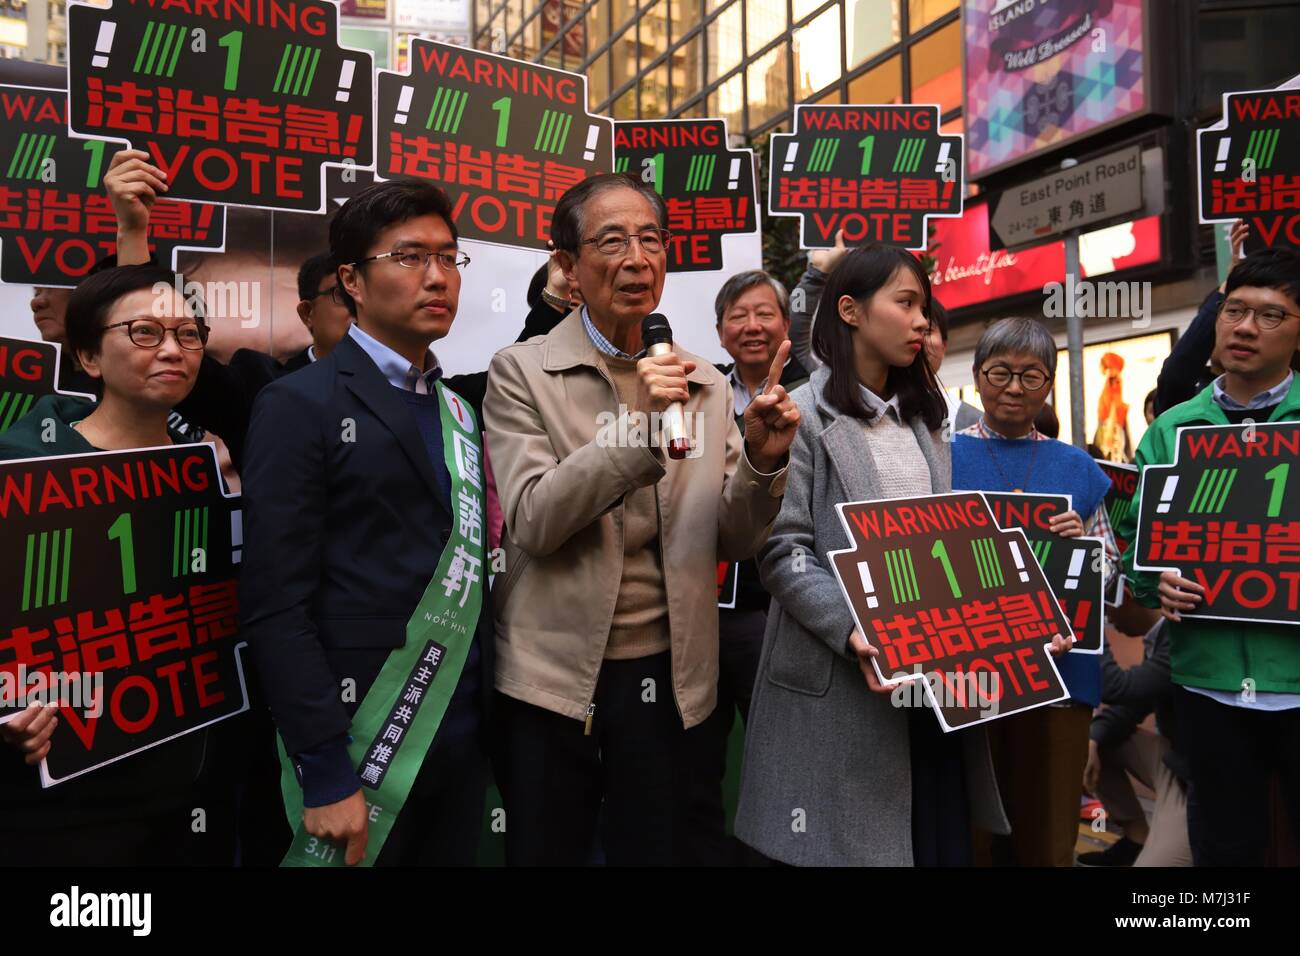 Hong Kong, CHINA. 11th Mar, 2018. Founder and former Chairman of the DEMOCRATIC PARTY, Martin Lee ( C ) calling citizens to vote out pro-China candidates in the LEGICO By-Election on the voting day, on the left stands candidate No.1 representing Democratic Party, Au Nok-hin. Mar-11, 2018.Hong Kong.ZUMA/Liau Chung Ren Credit: Liau Chung Ren/ZUMA Wire/Alamy Live News Stock Photo